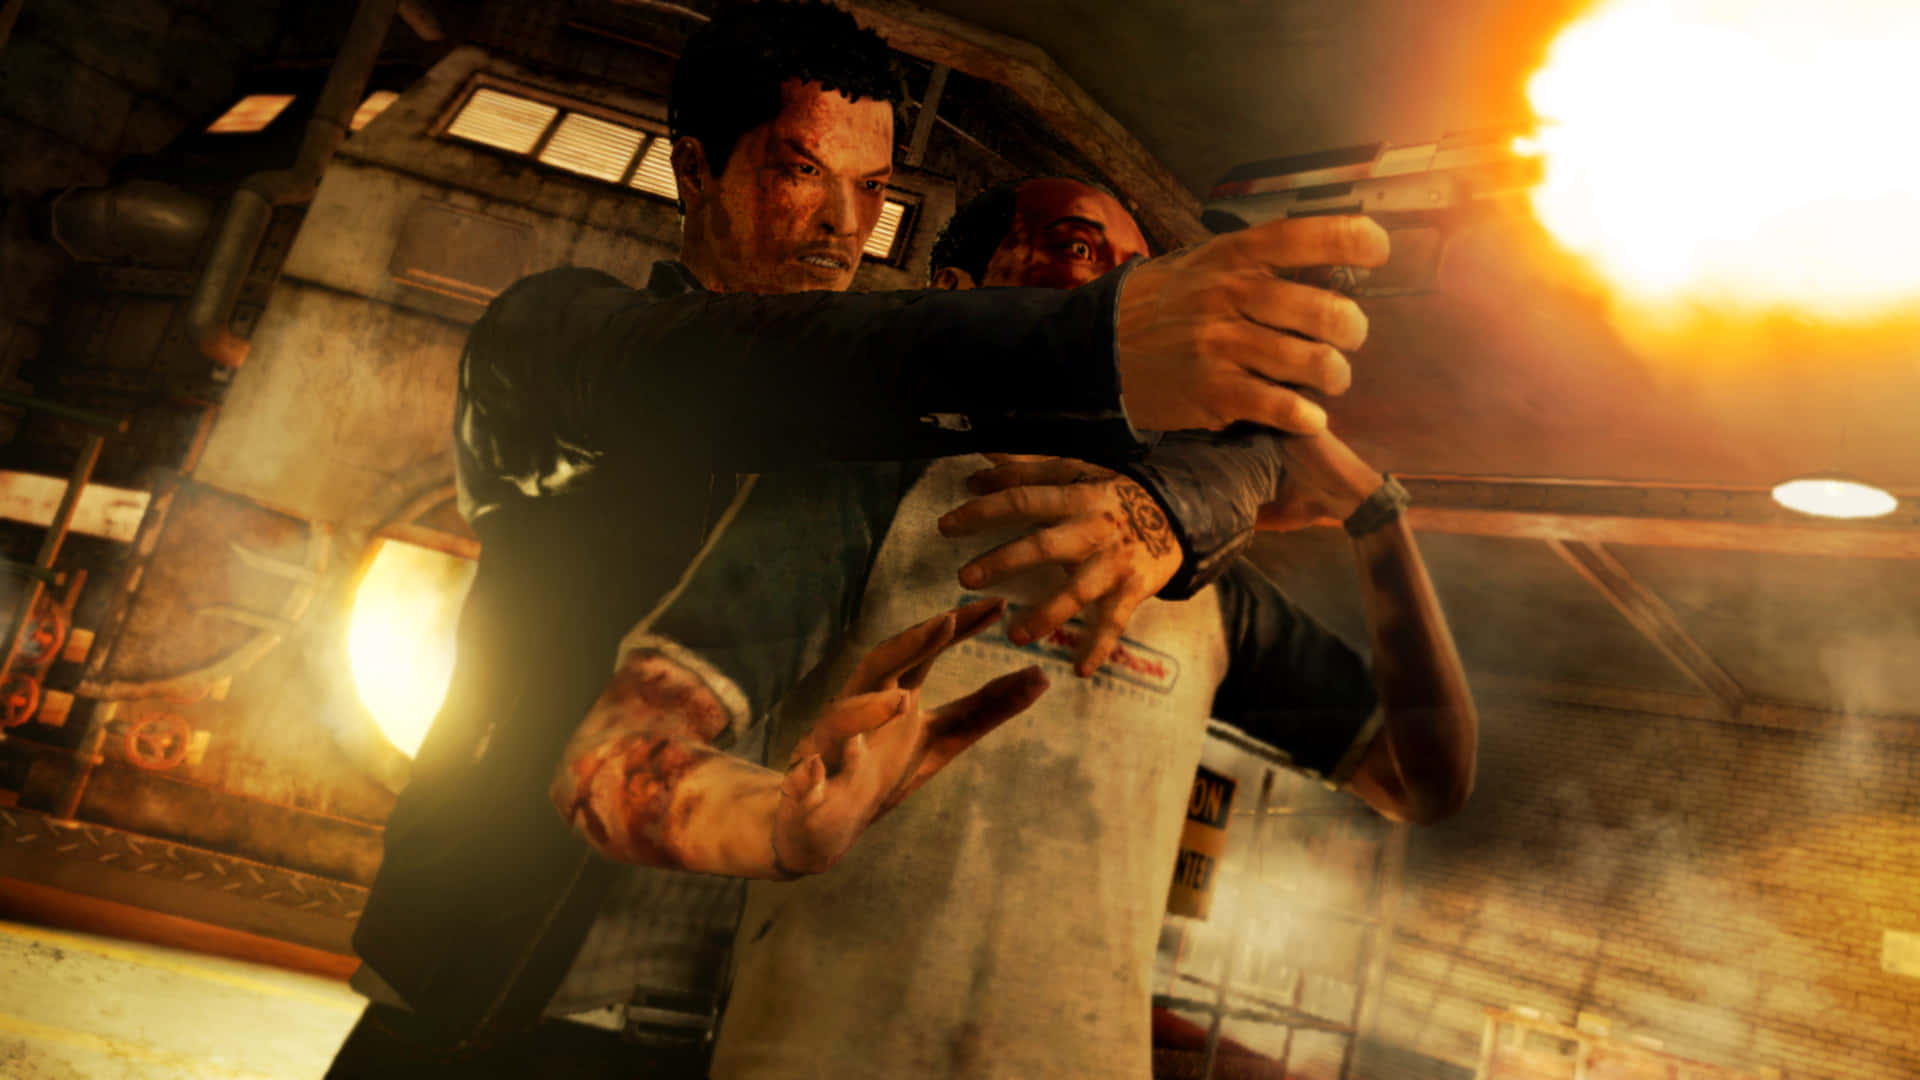 Best Sleeping Dogs Background Wei Shen Shooting With A Hostage